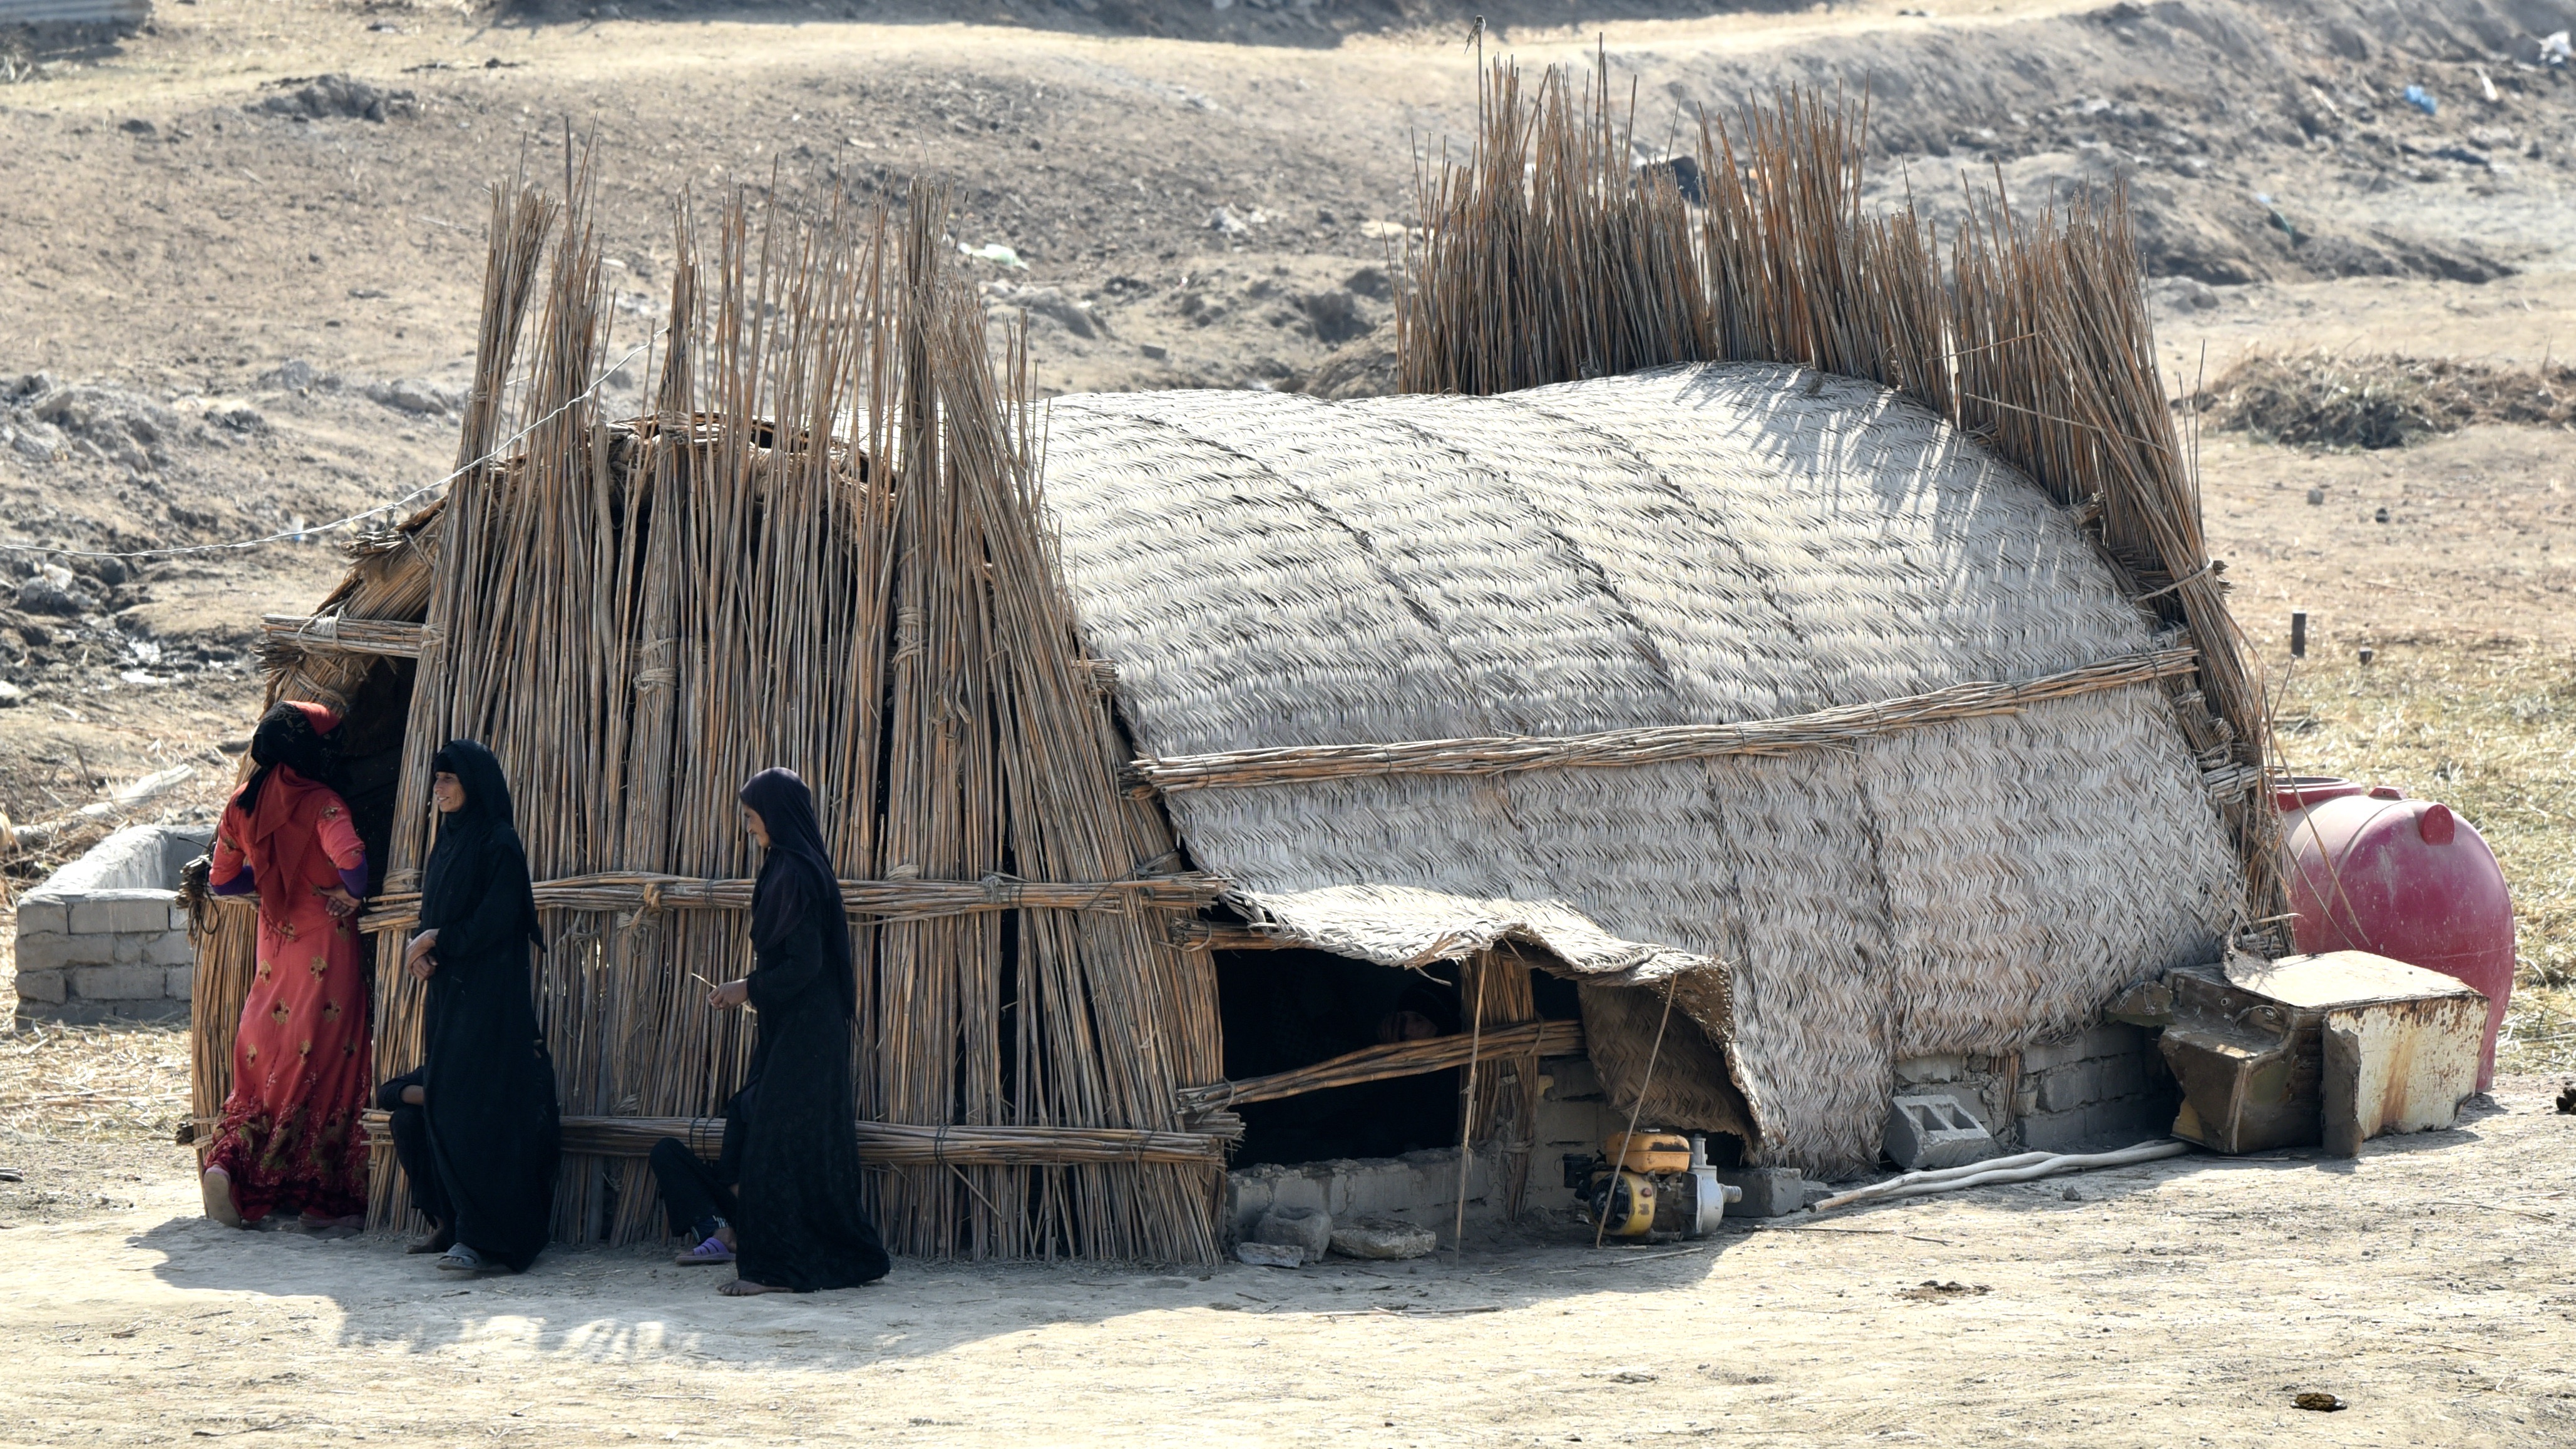 Marsh Arab women stand in the shade in front a traditional structure in Chibayish, Iraq